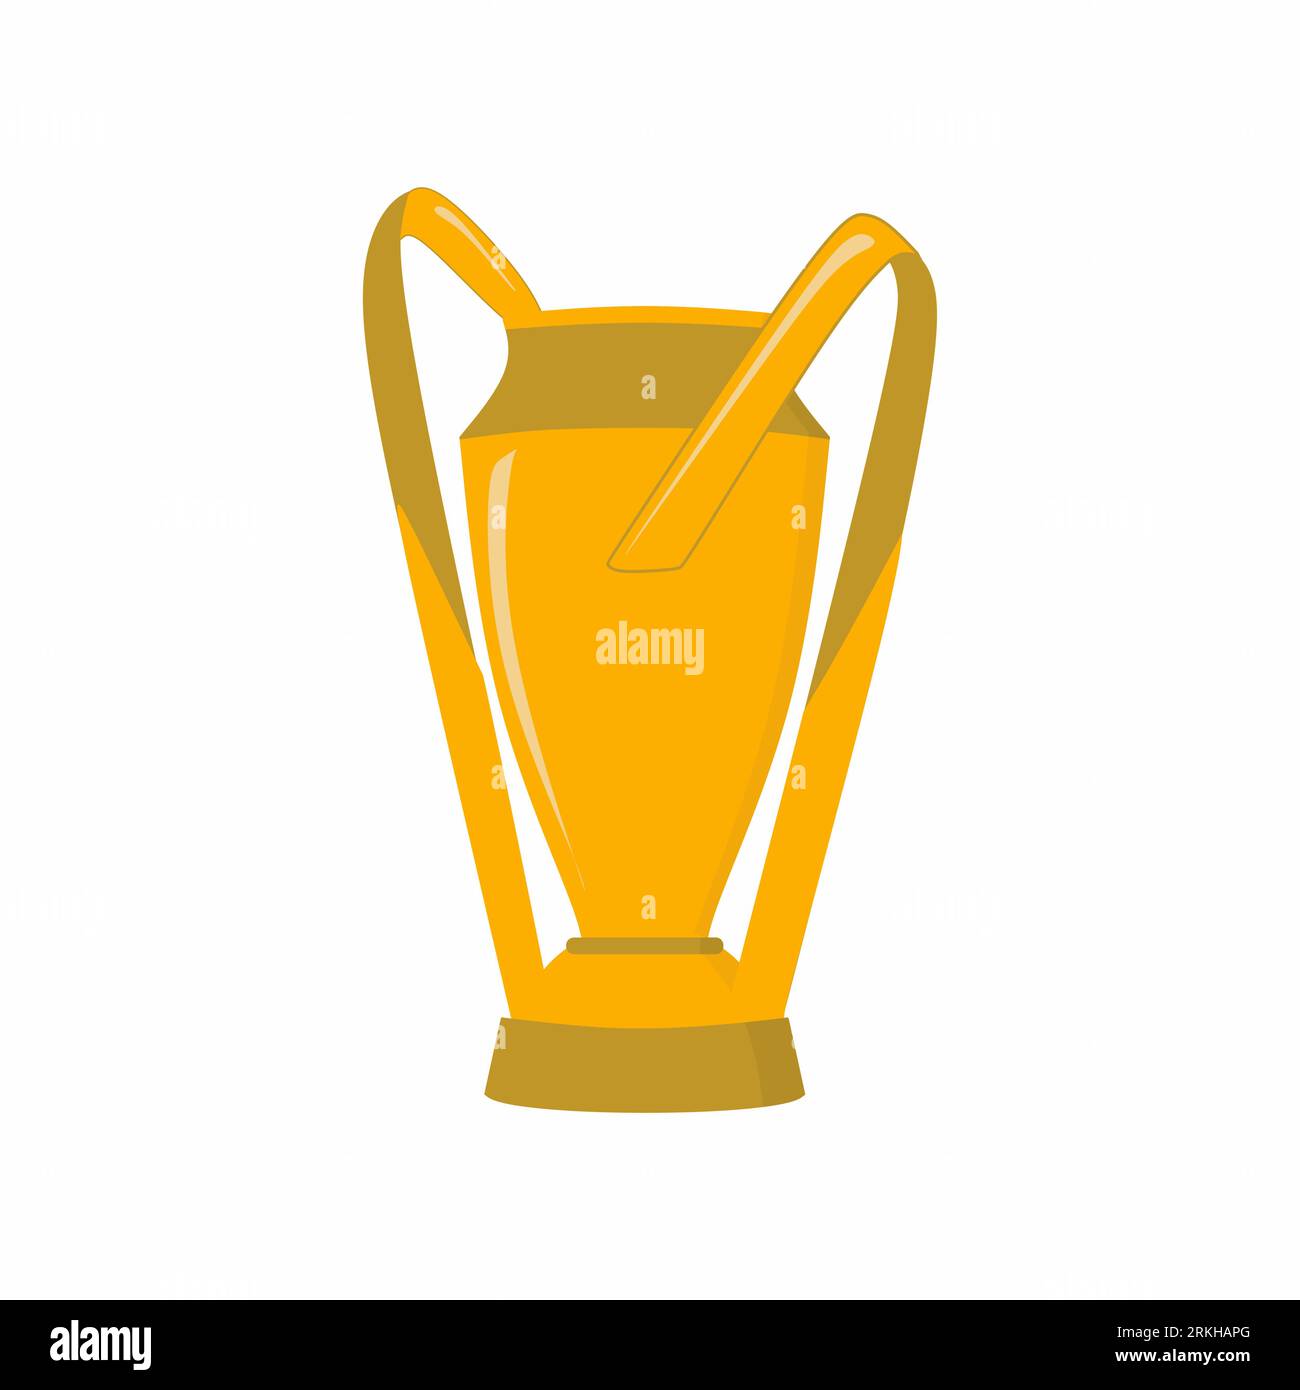 Major League Soccer cup trophy cartoon icon design isolated on white background. Premier professional soccer league in the United States and Canada. C Stock Vector